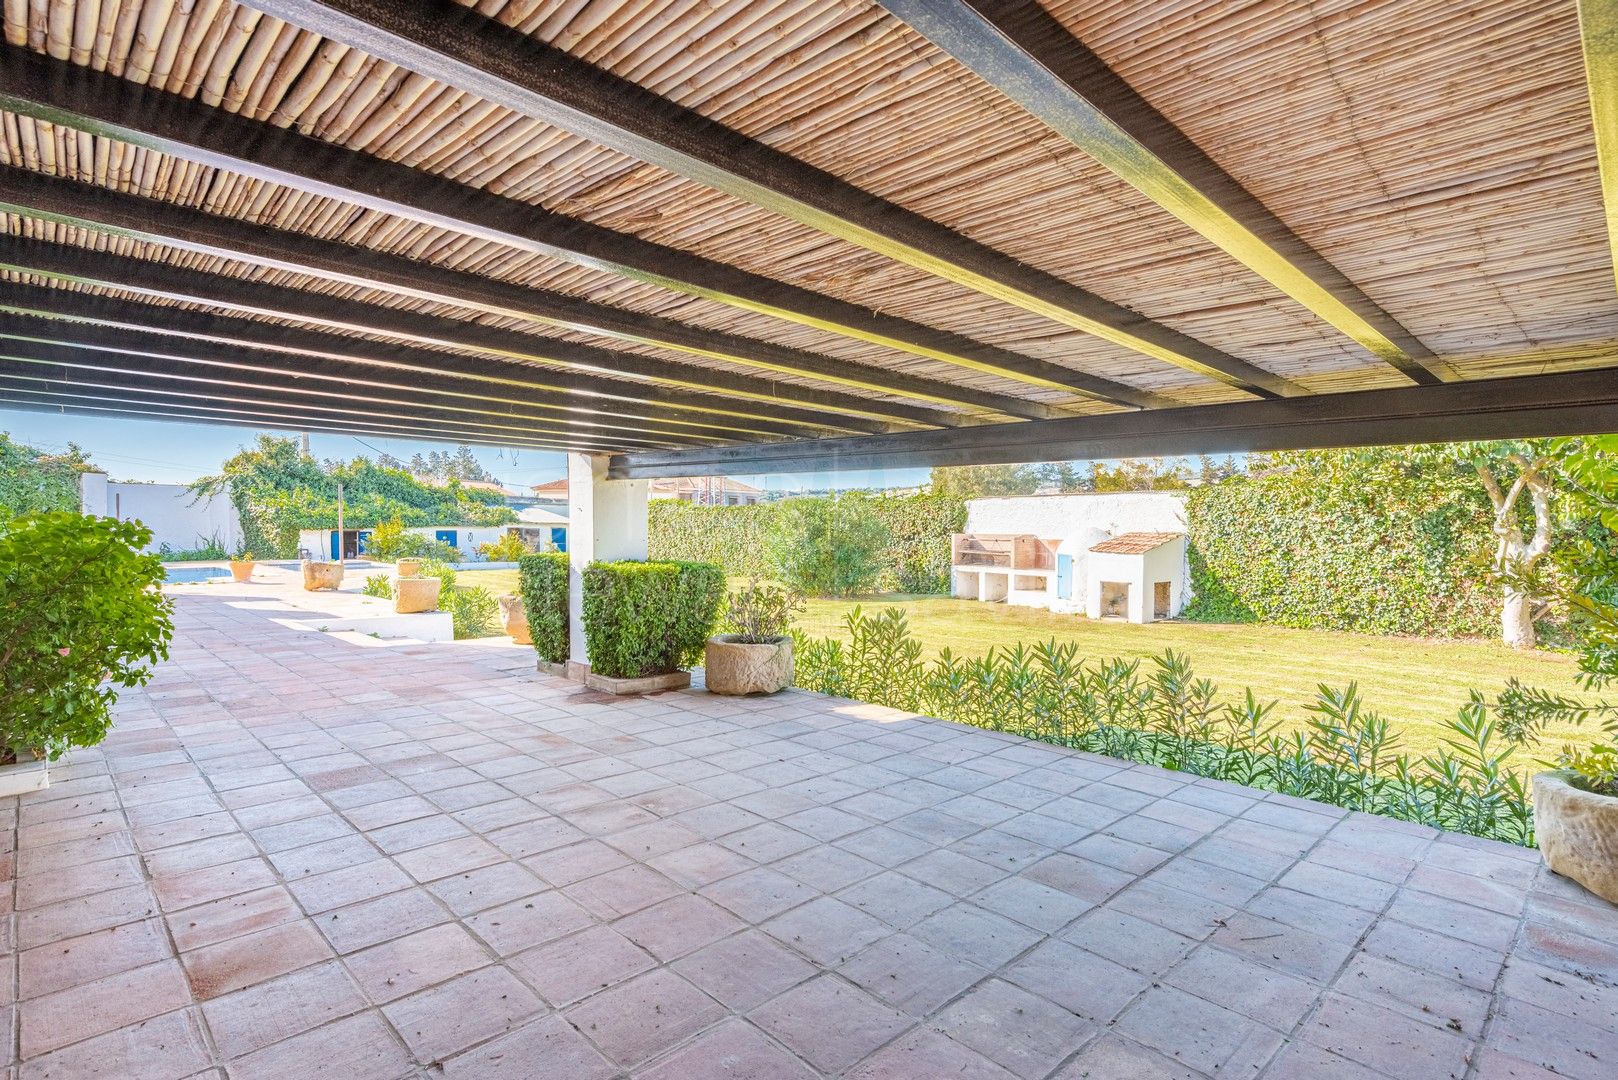 The perfect equestrian country home 10 mins drive from Sotogrande